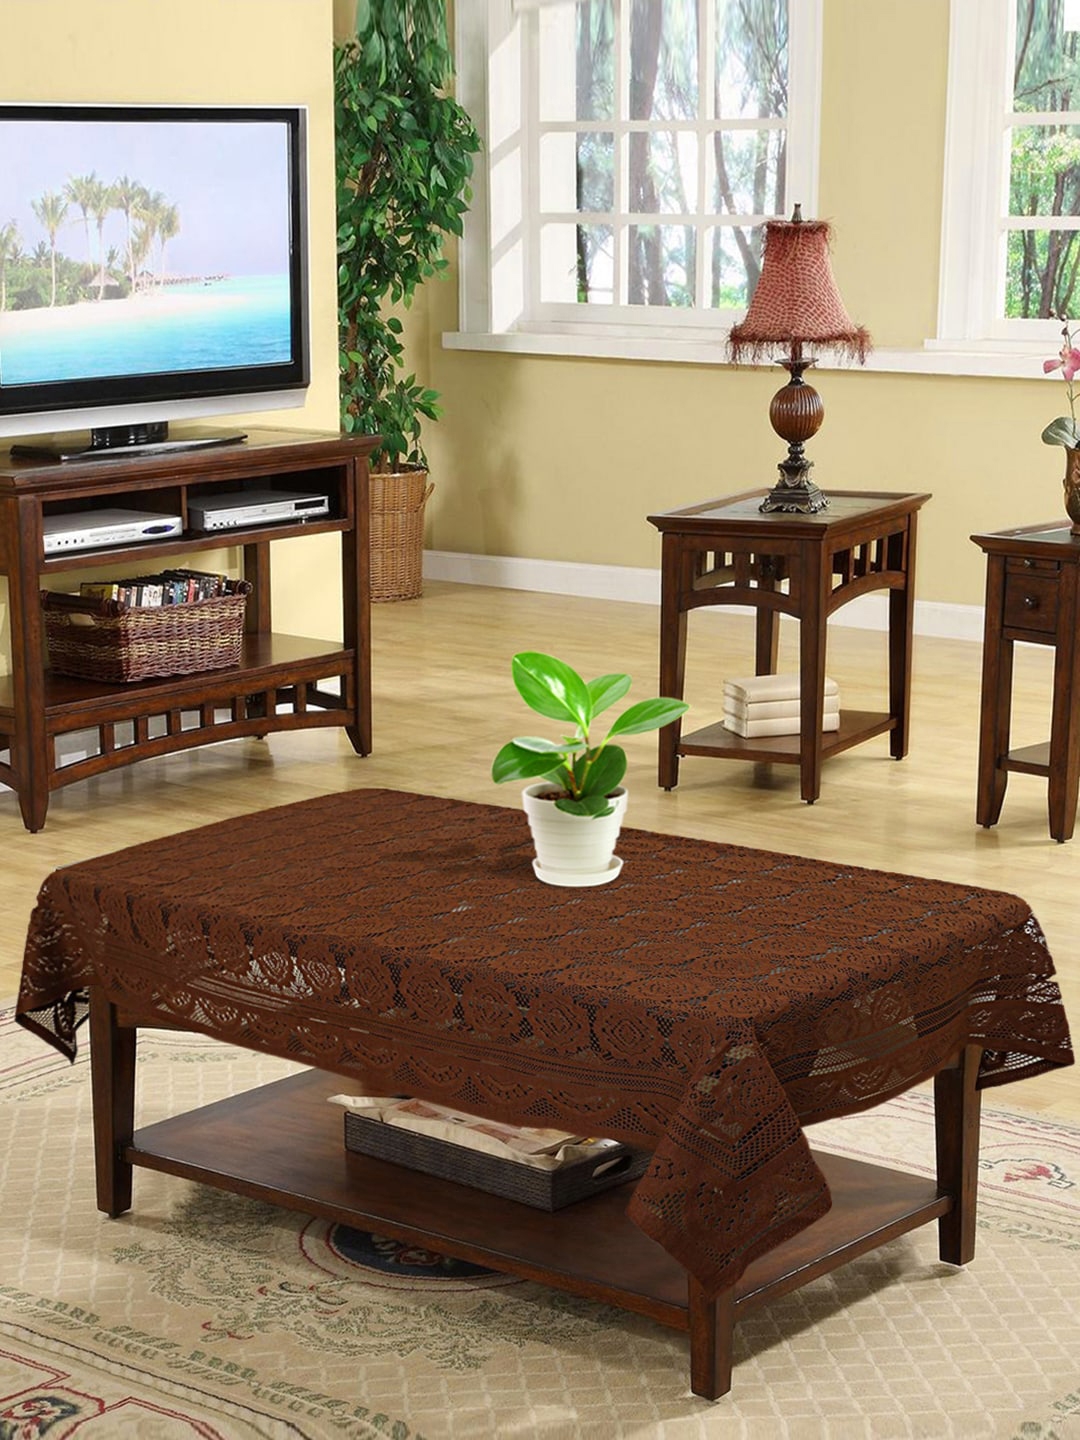 Kuber Industries Brown Self Design 4 Seater Rectangle Cotton Table Cover